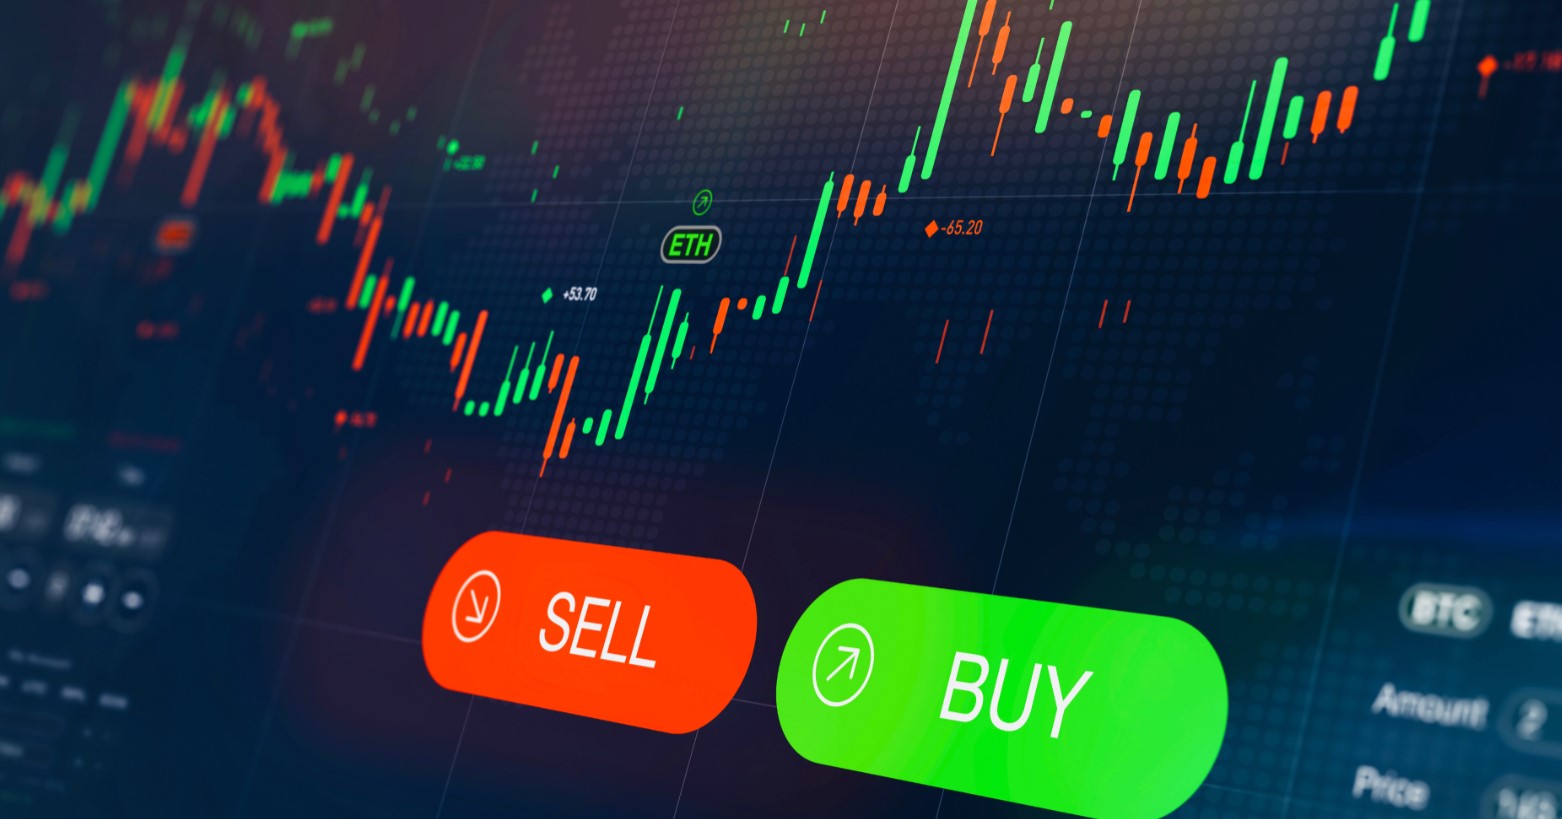 how to buy stock in crypto.com